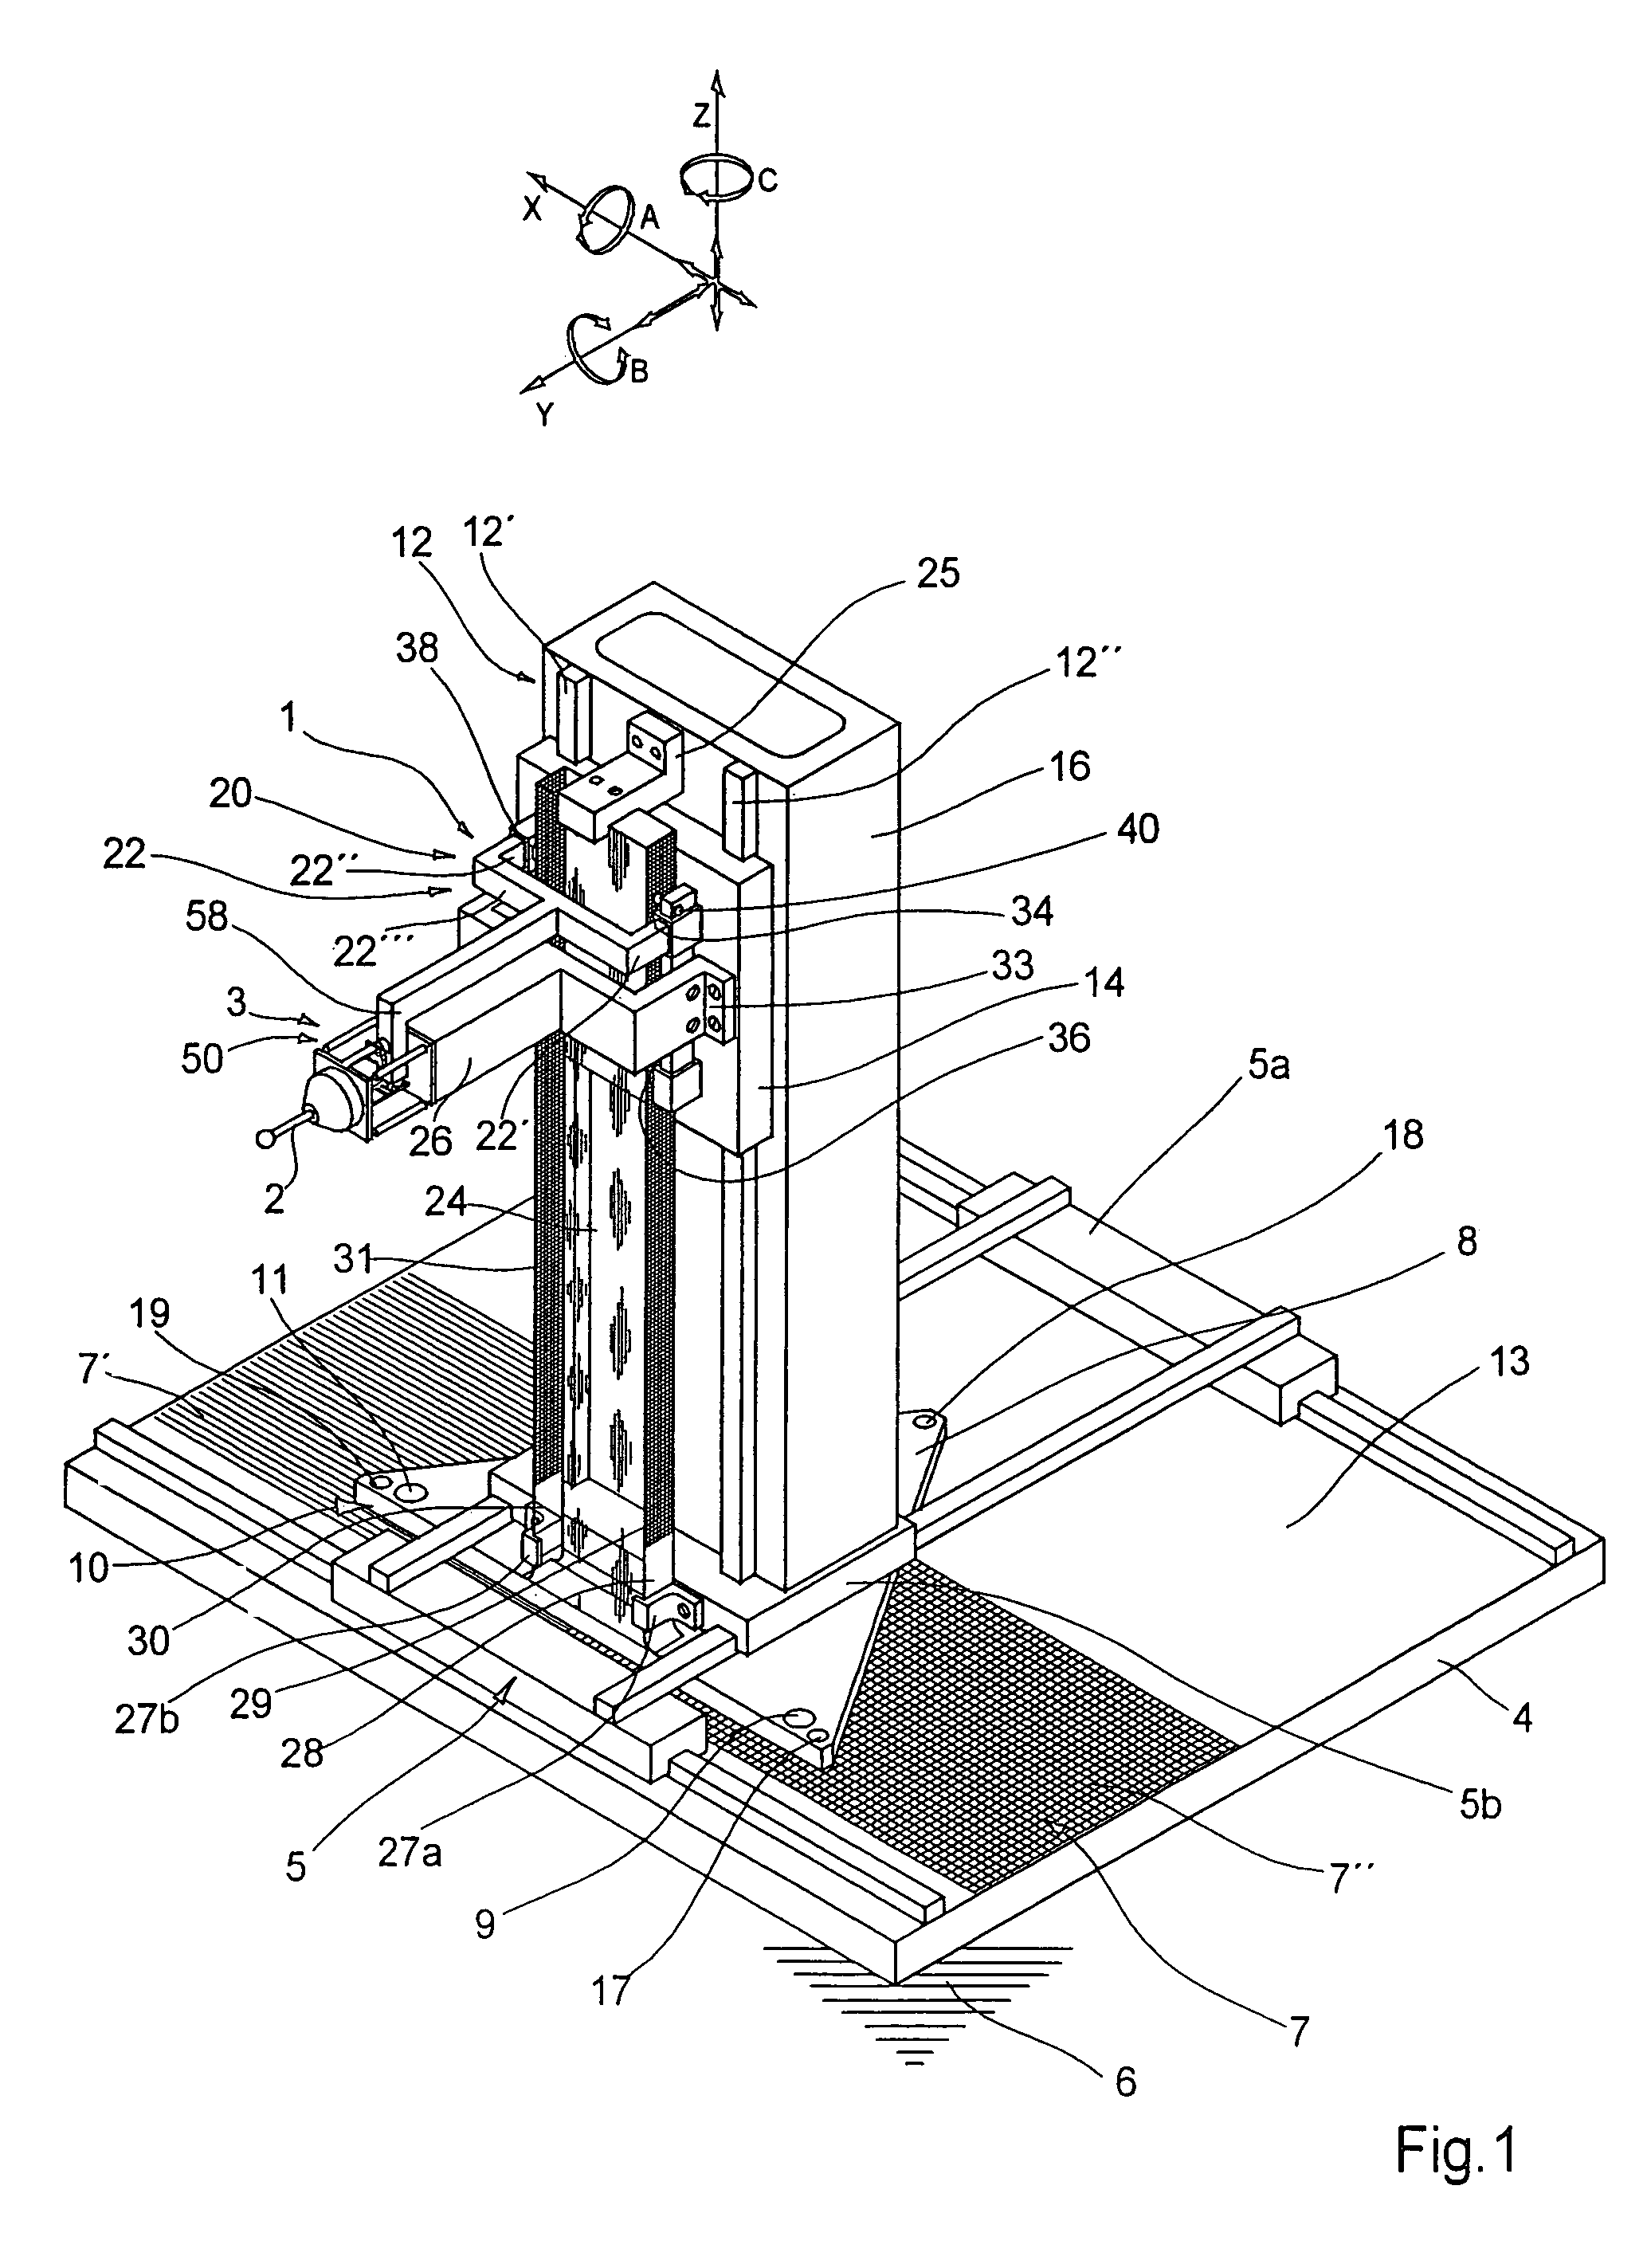 Apparatus for detecting the position of a probe element in a multi-coordinate measuring device